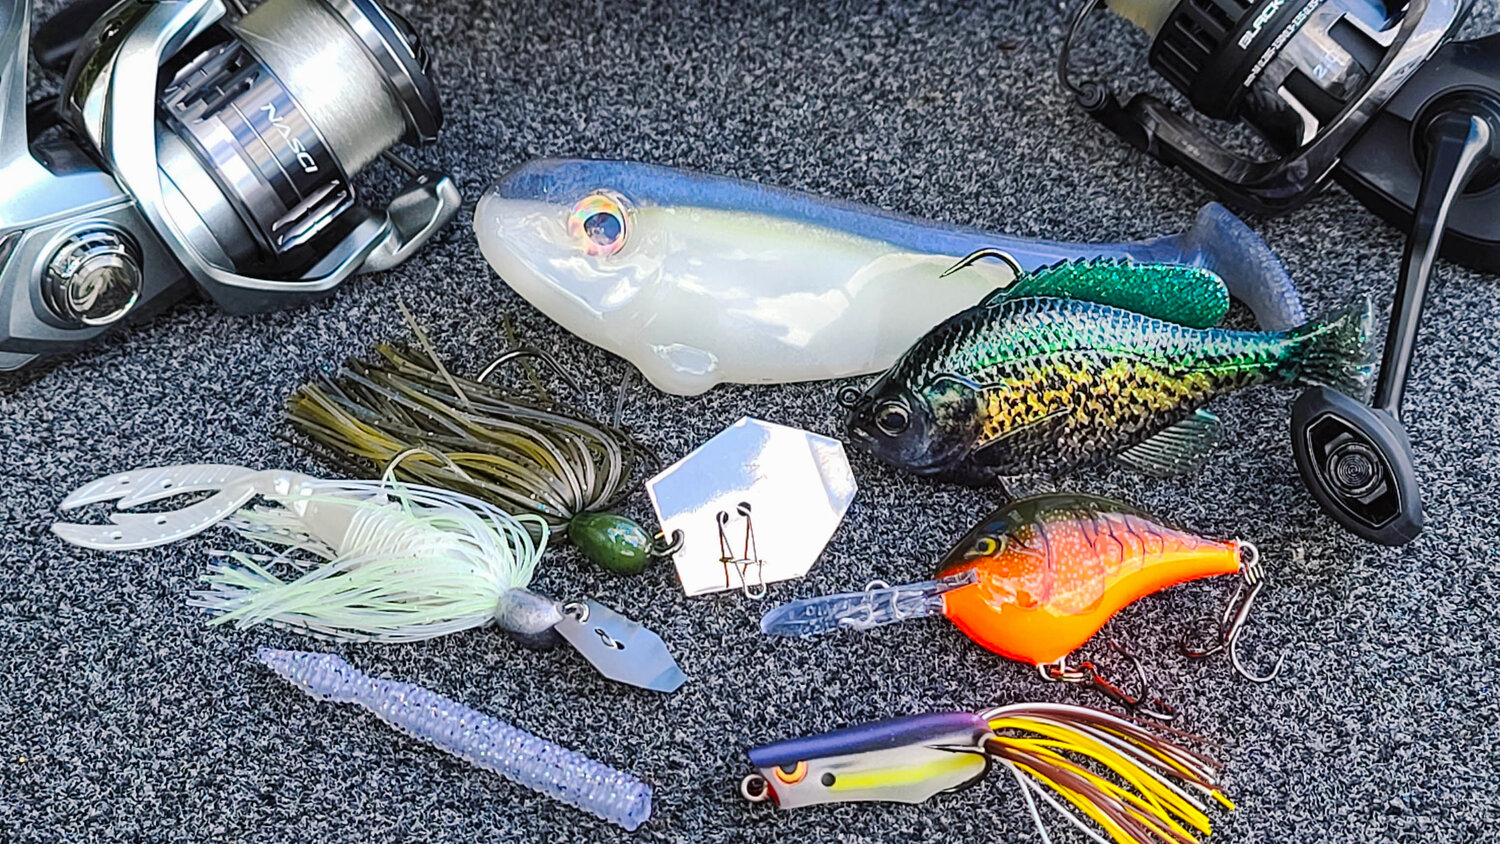 Bass Fishing Gear Review: New Rods, Crankbaits, Topwater, Worms! — Tactical  Bassin' - Bass Fishing Blog